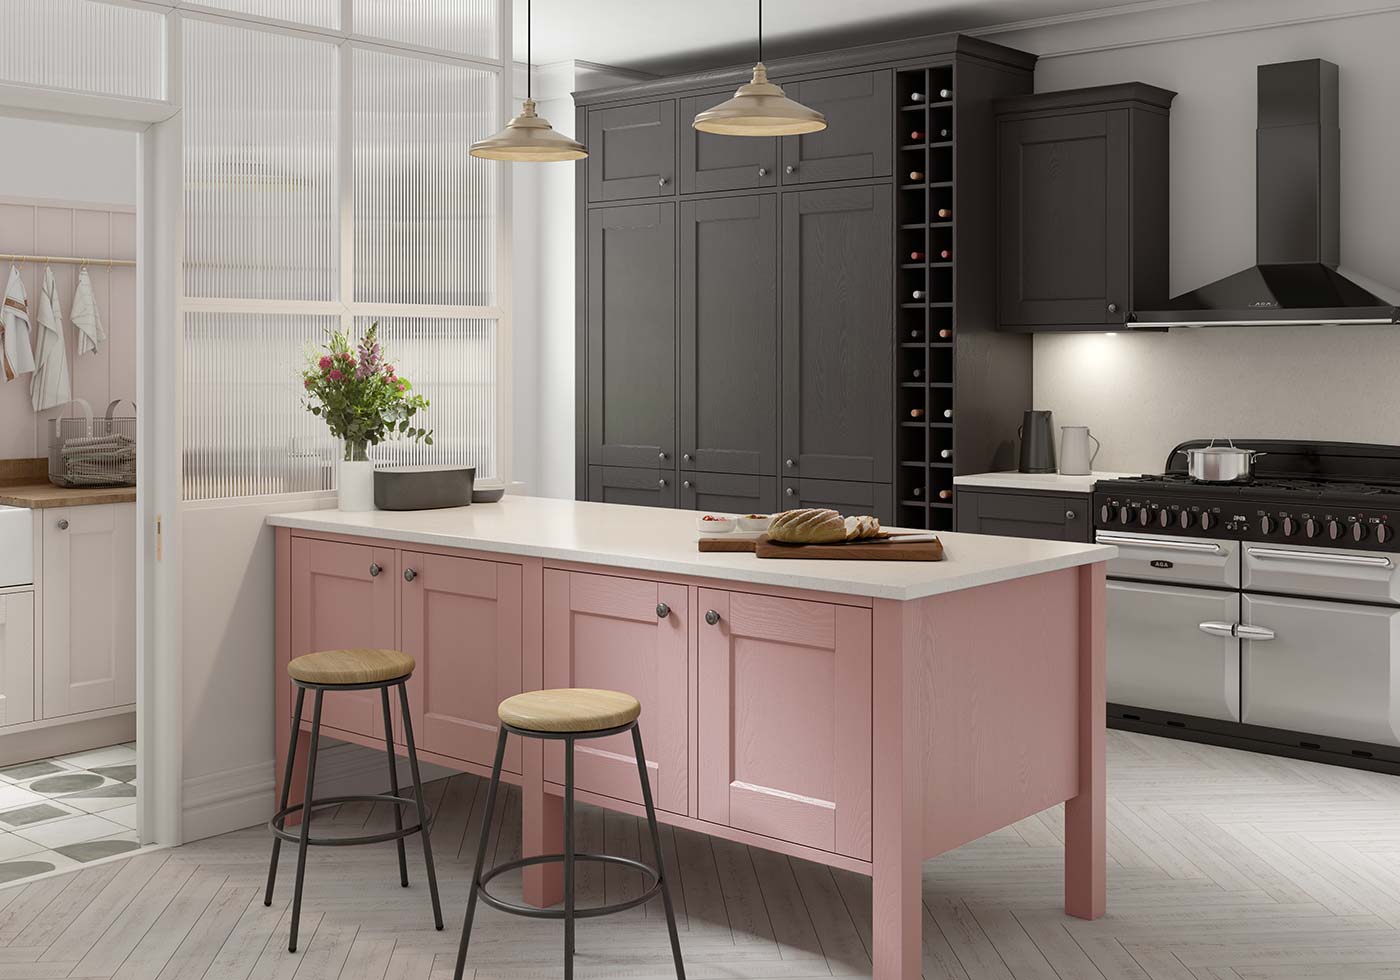 Your Lovely Pink Kitchen - 5 Great Ideas for Pink Kitchen Decor